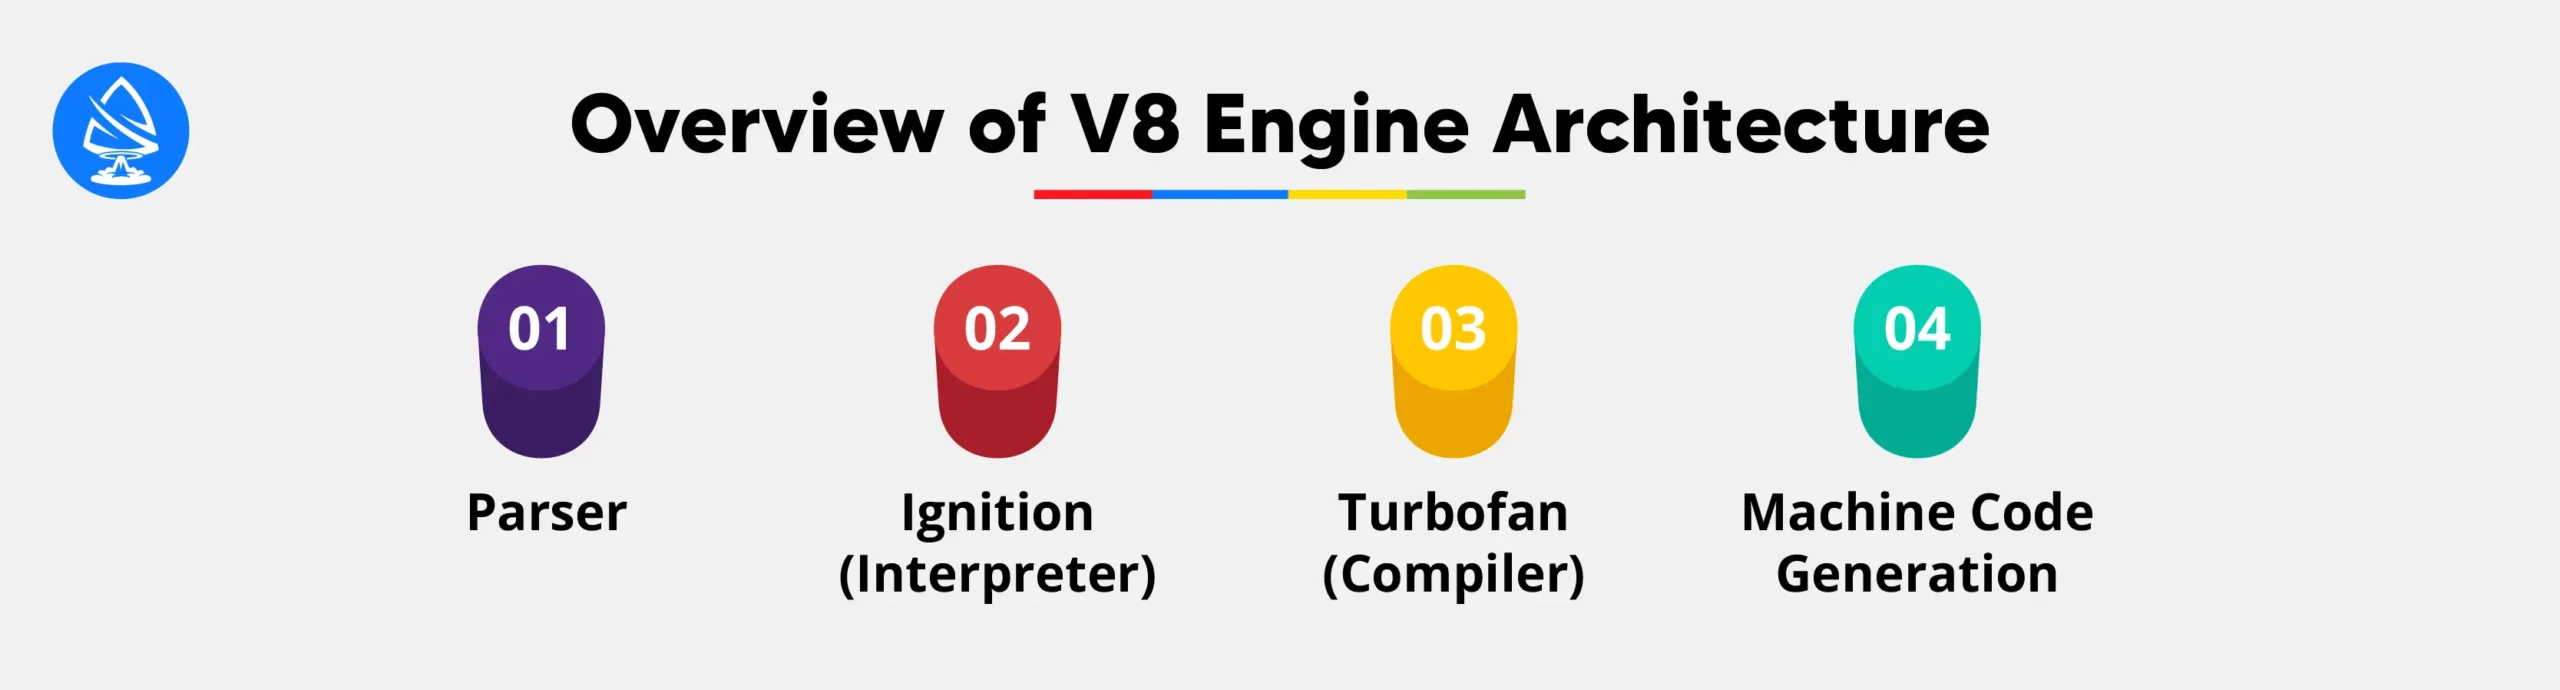 Overview of V8 Engine Architecture 